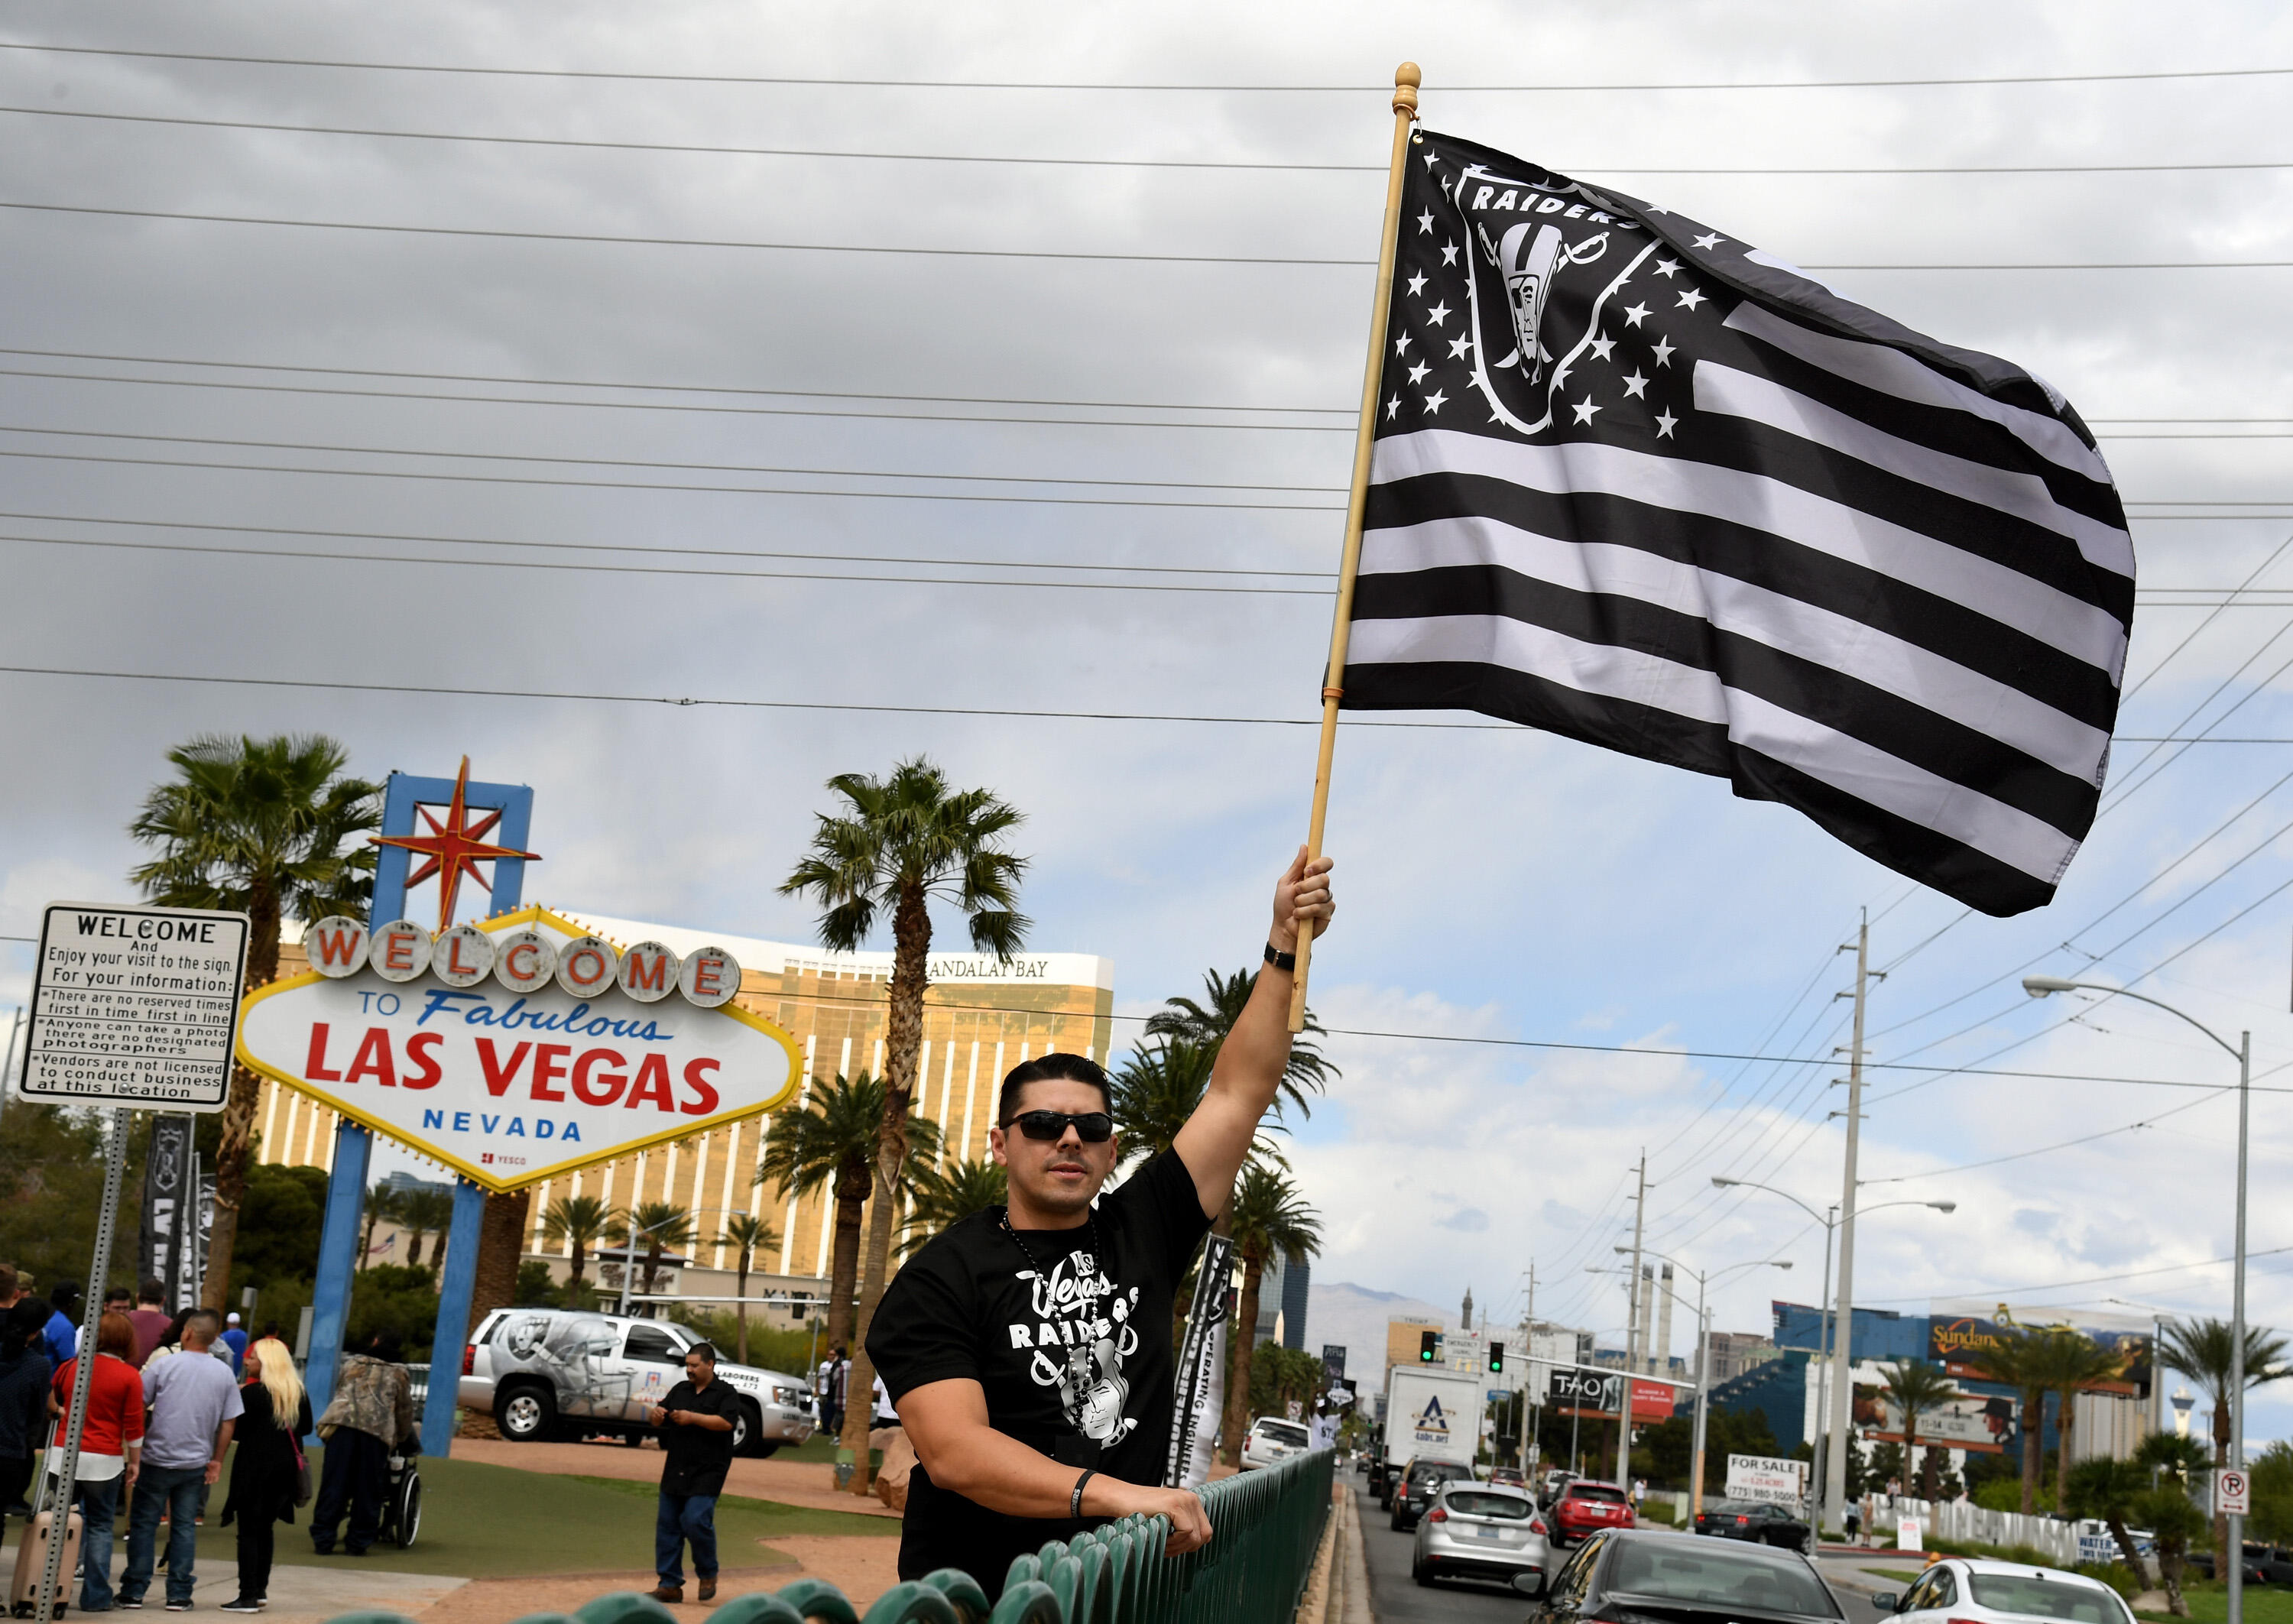 LAS VEGAS, NV - MARCH 27:  Oakland Raiders fan Matt Gutierrez of Nevada waves a Raiders flag in front of the Welcome to Fabulous Las Vegas sign after National Football League owners voted 31-1 to approve the team's application to relocate to Las Vegas dur